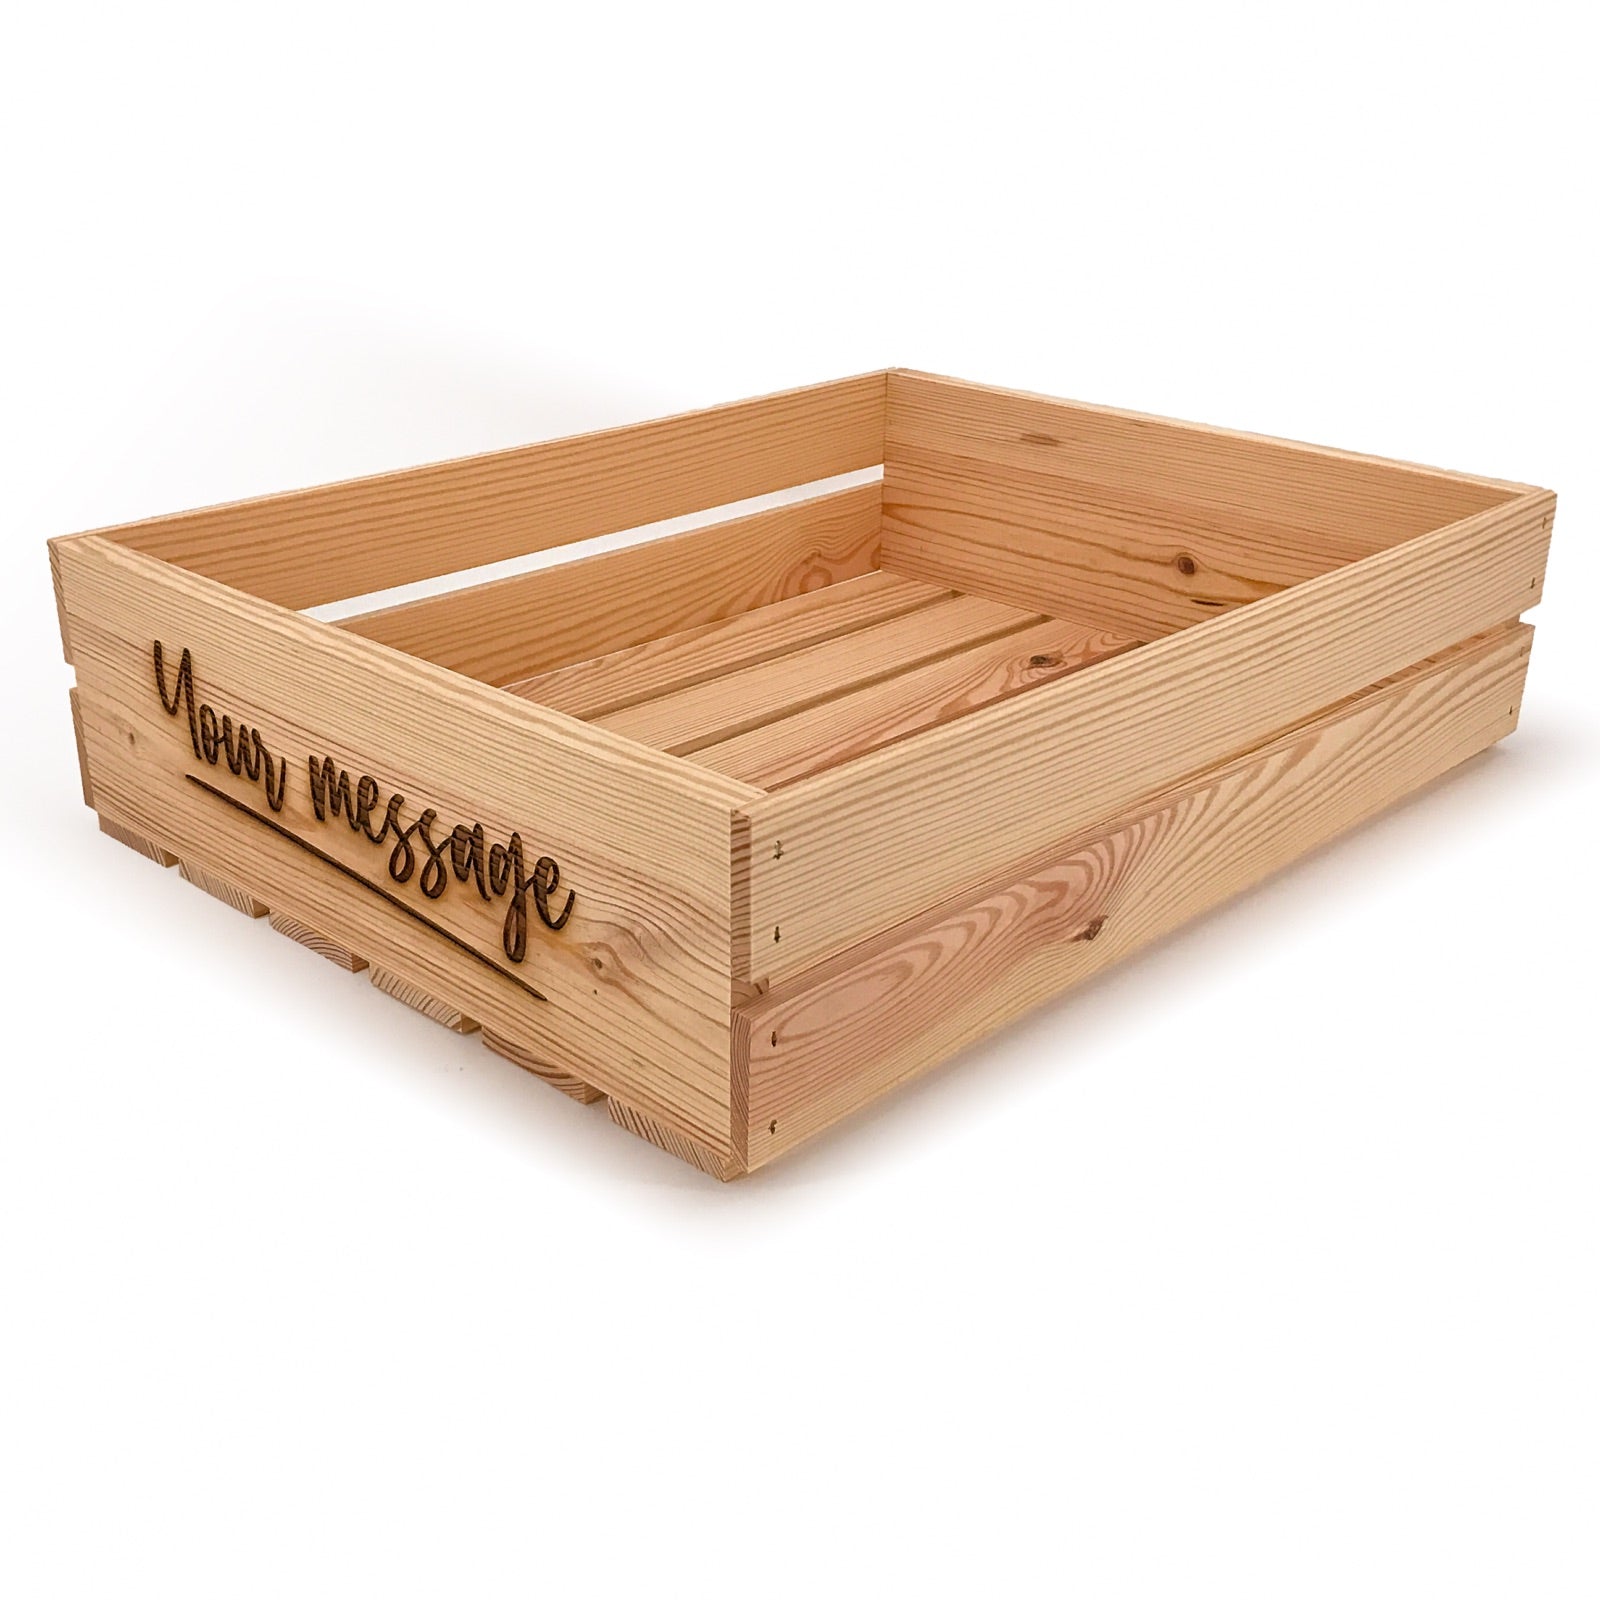 Small wooden crate with custom message 22x17x5.25